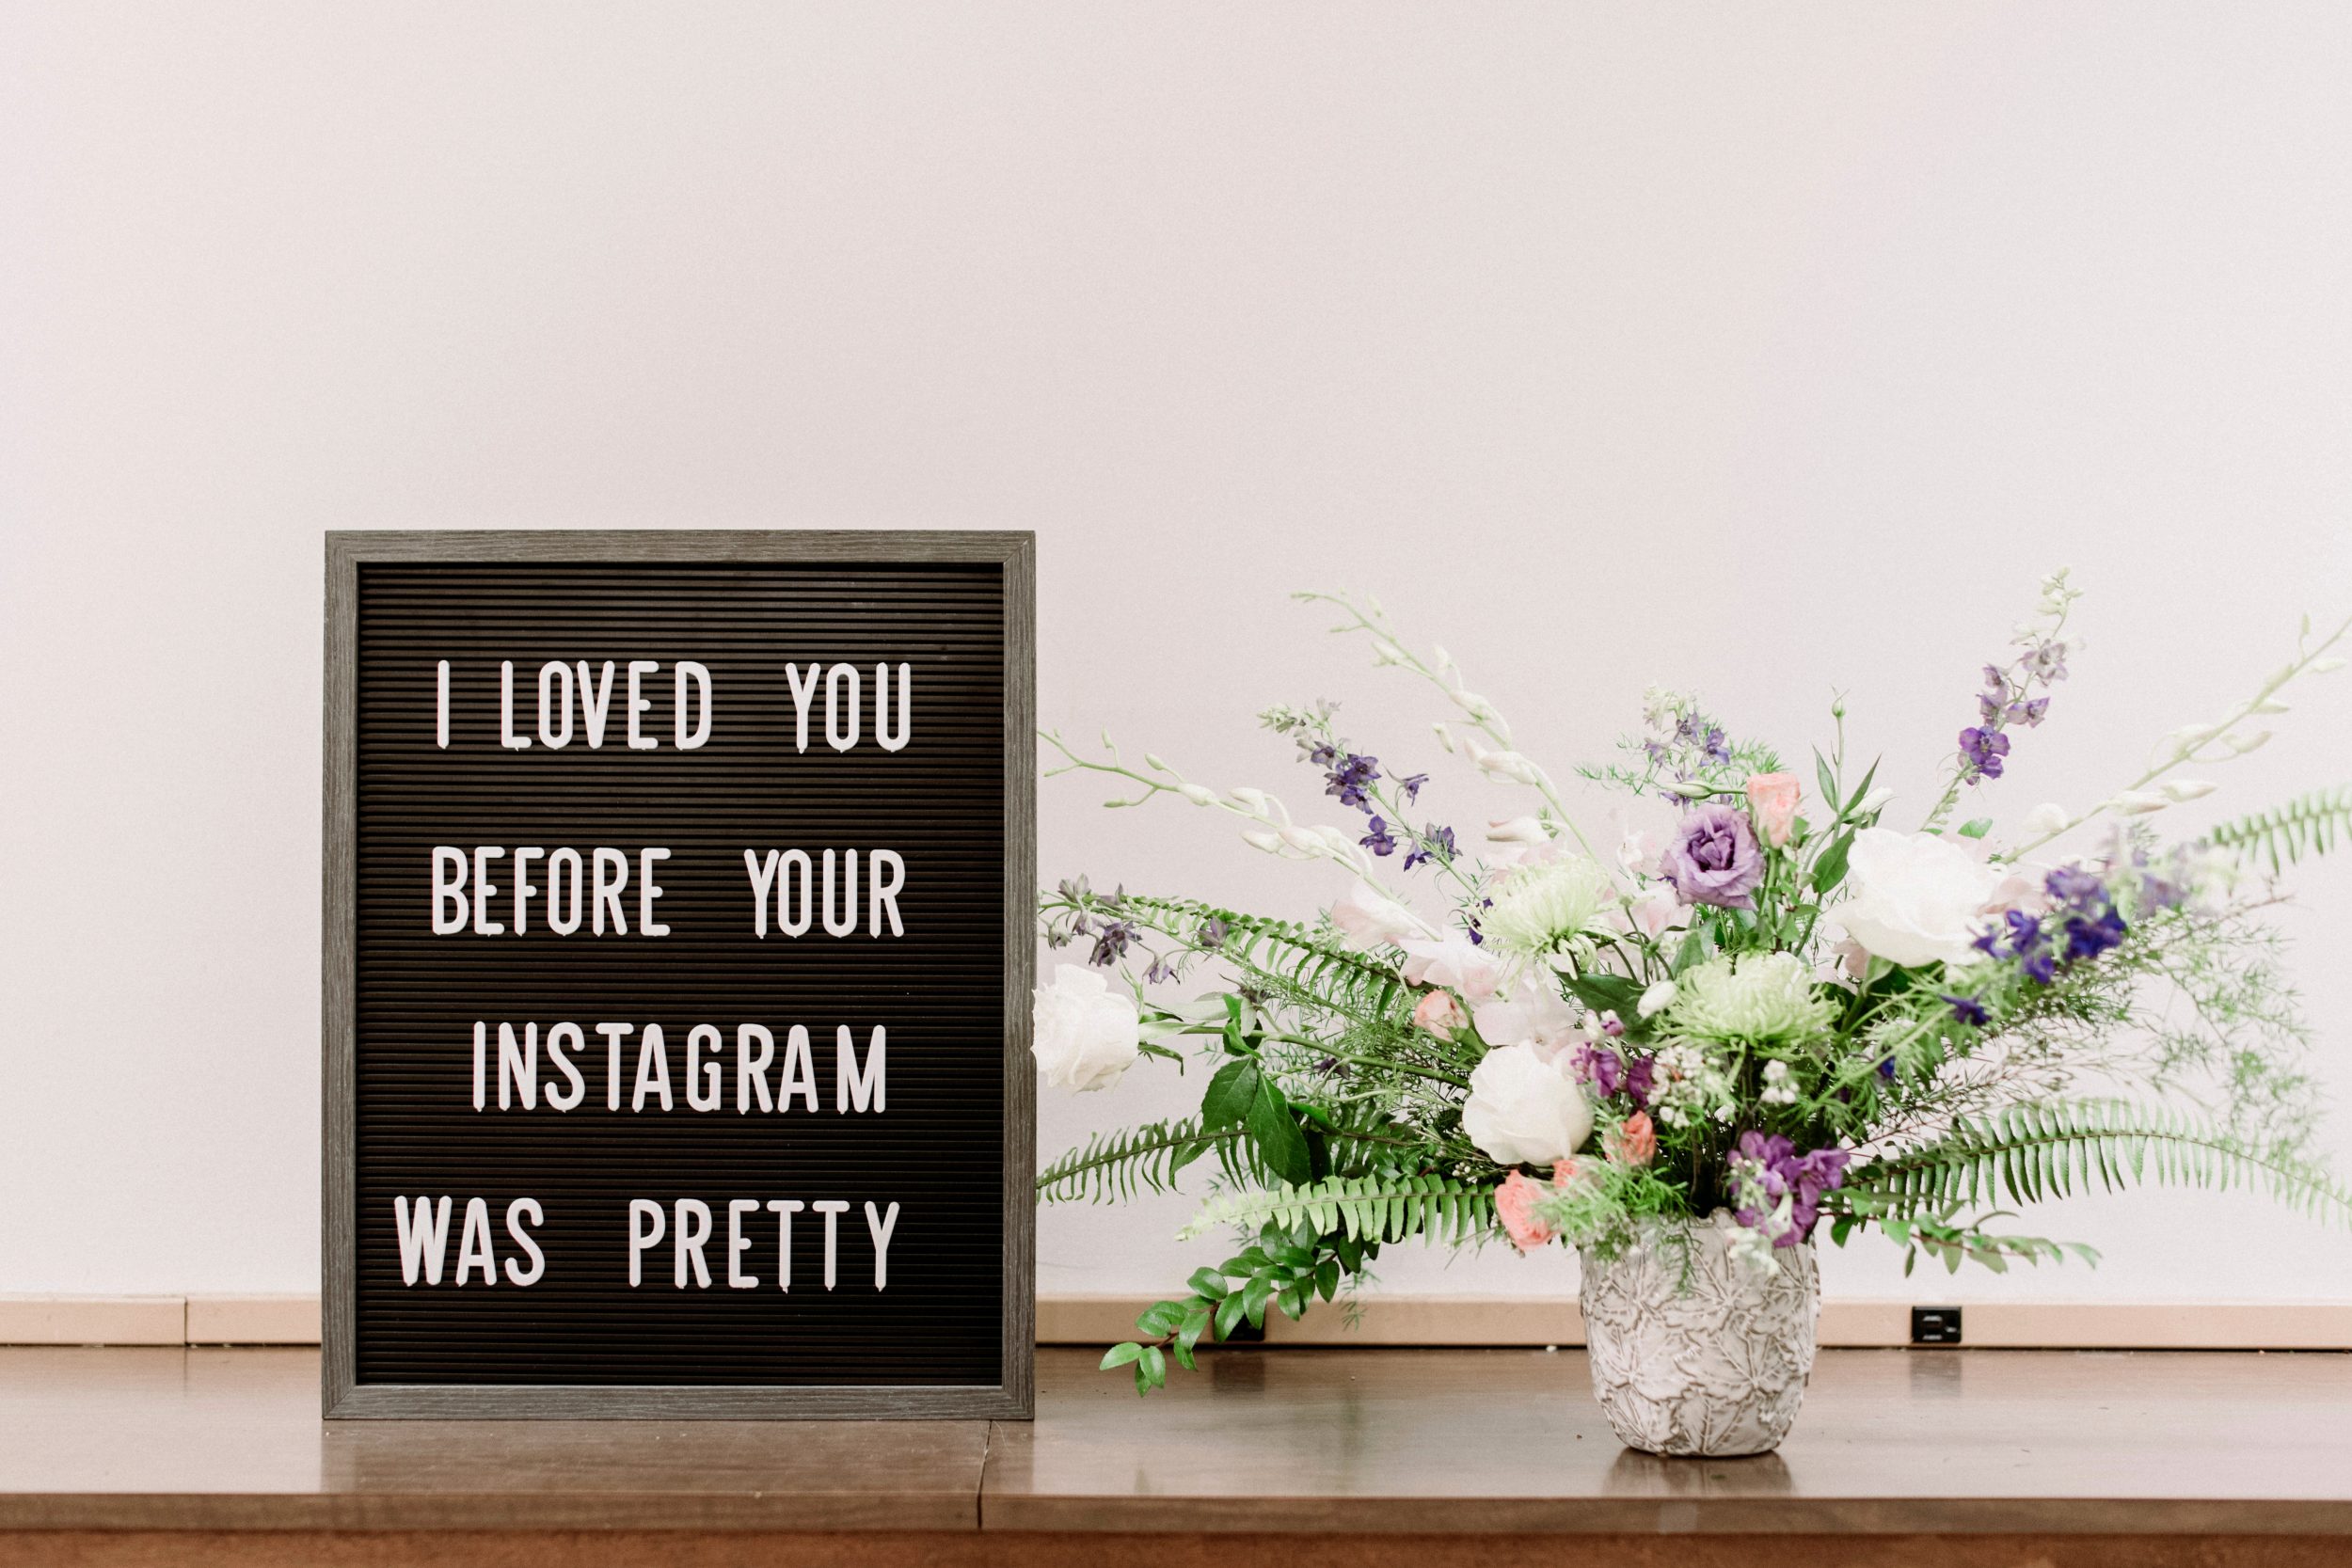 I loved you before your Instagram was pretty